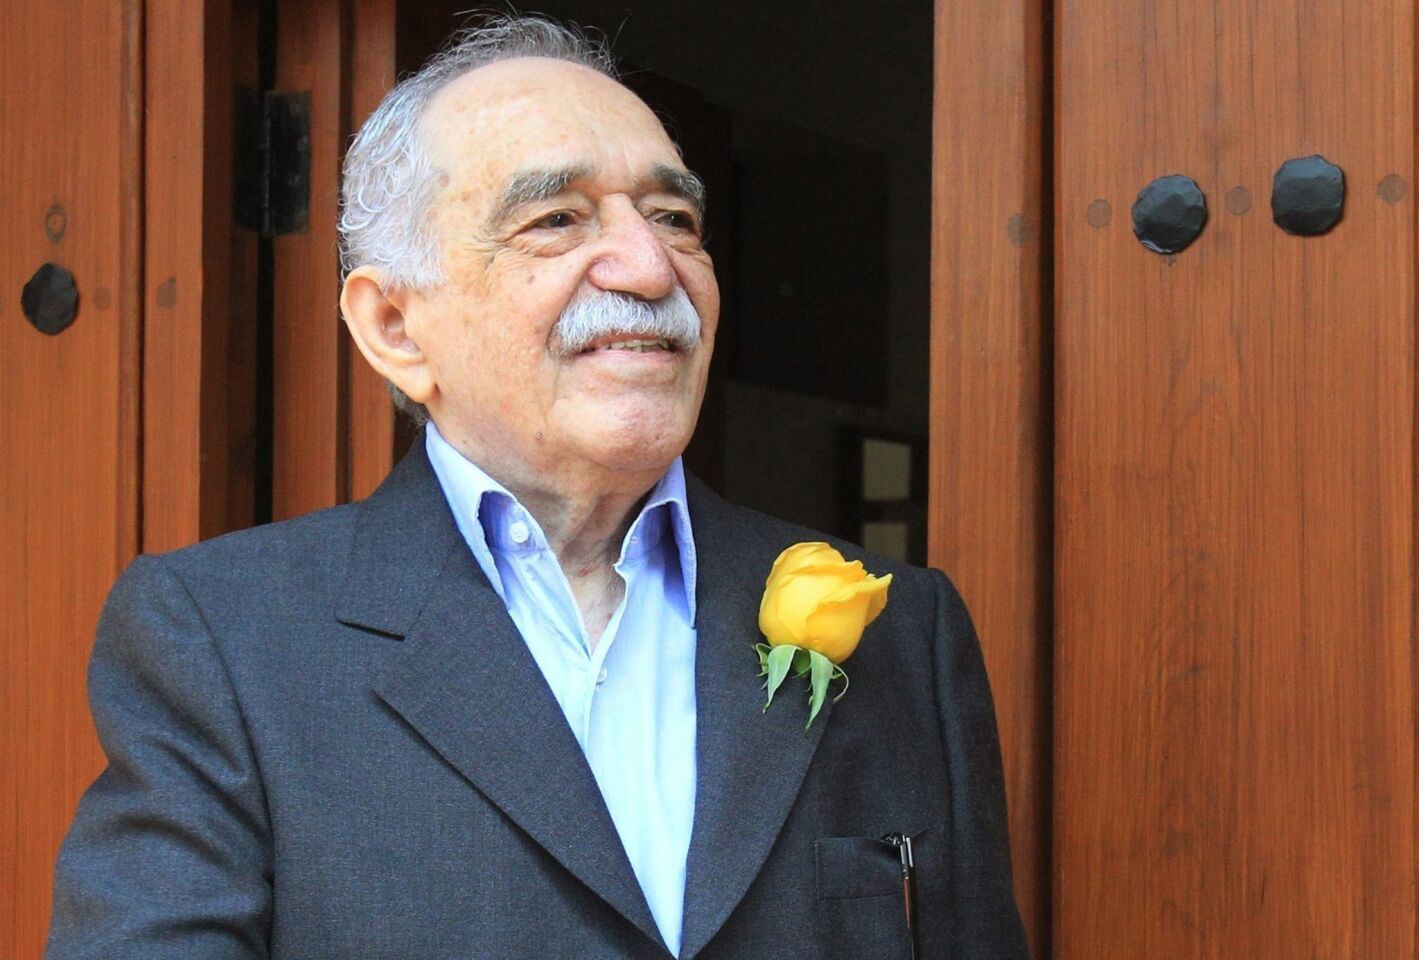 The Nobel Prize-winning Colombian novelist's "One Hundred Years of Solitude" enchanted millions. His influence helped fuel the international popularity of Latin American literature in the years after World War II. He was 87.